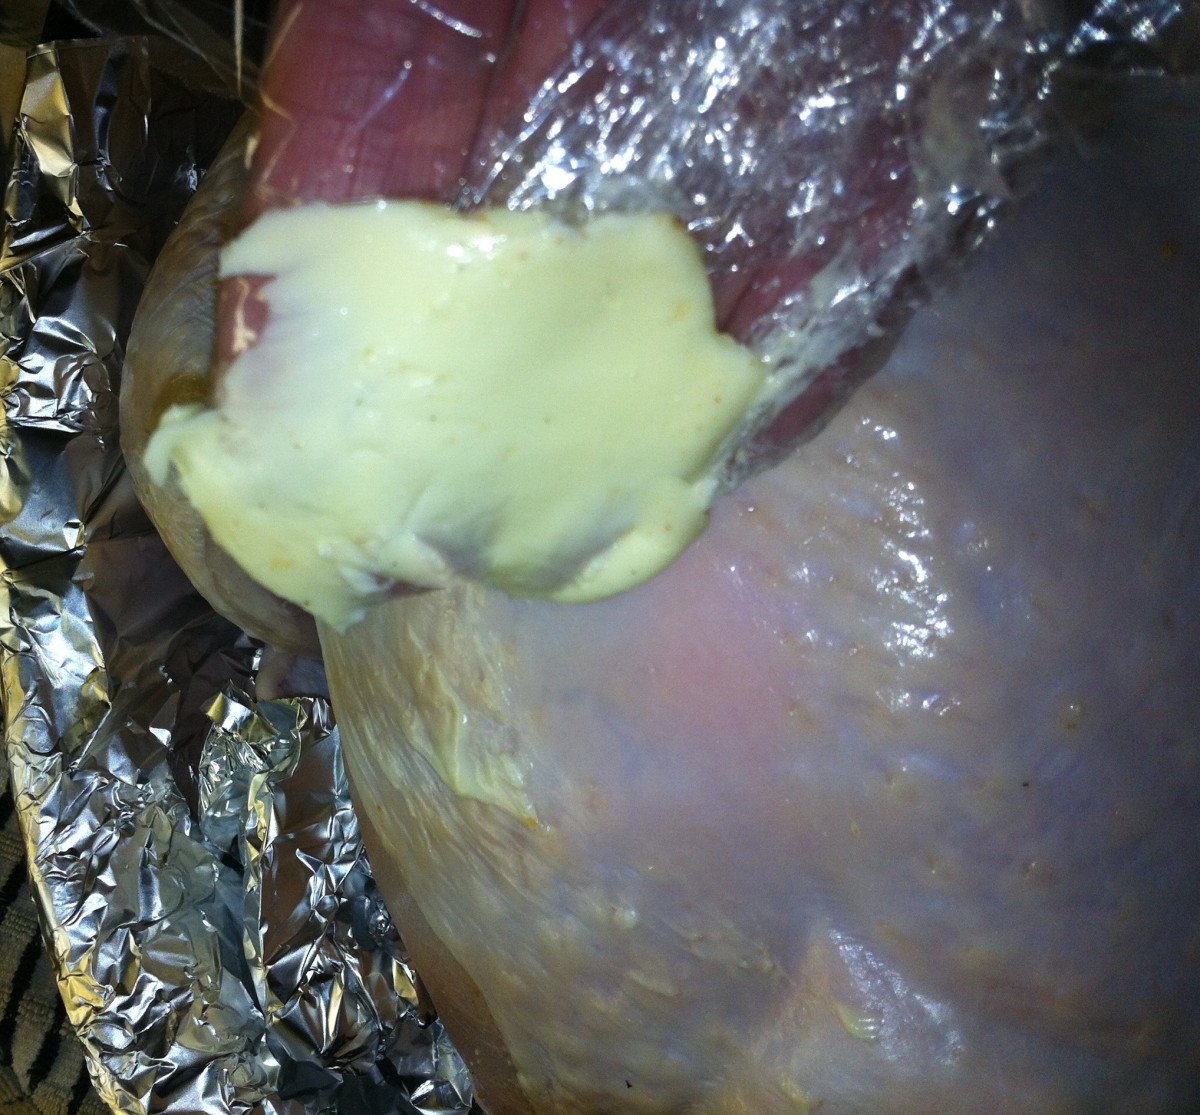 Applying butter to the turkey. I scooped the butter with plastic wrap in order to apply it to the bird.